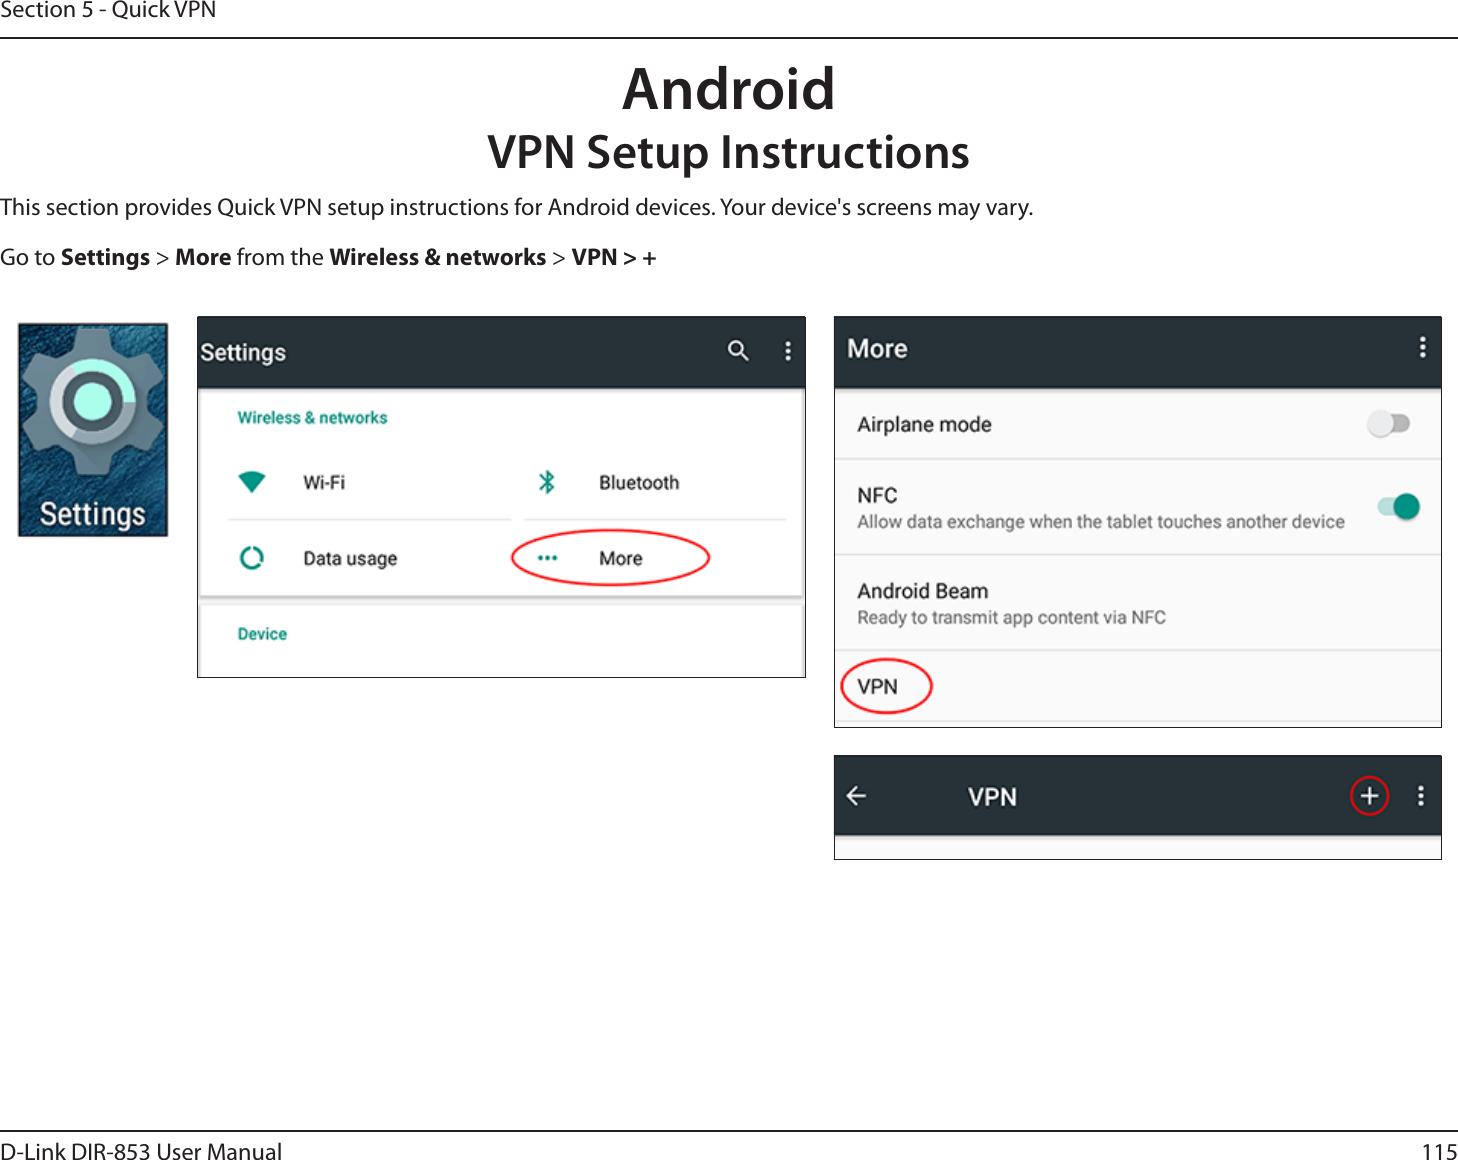 115D-Link DIR-853 User ManualSection 5 - Quick VPNThis section provides Quick VPN setup instructions for Android devices. Your device&apos;s screens may vary.Go to Settings &gt; More from the Wireless &amp; networks &gt; VPN &gt; +AndroidVPN Setup Instructions